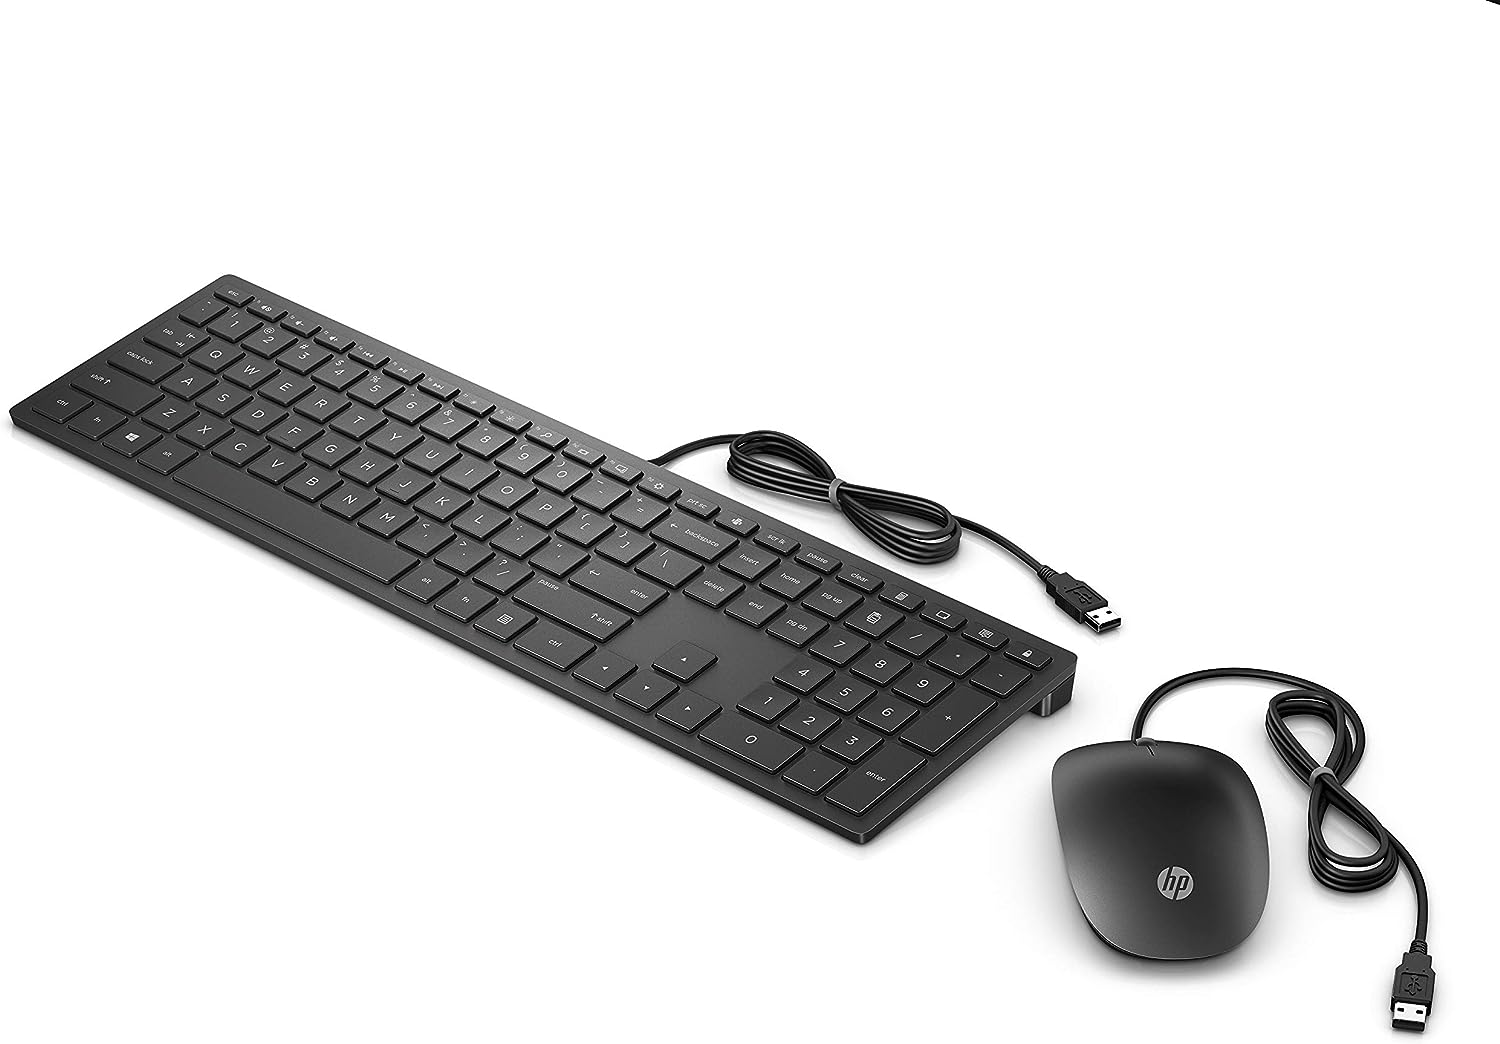 HP Pavilion 400 Bundle (4CE97AA) Keyboard and mouse with cable (QWERTZ, 1.600 dpi, USB cable, 3 buttons, scroll wheel) black, Italian Layout